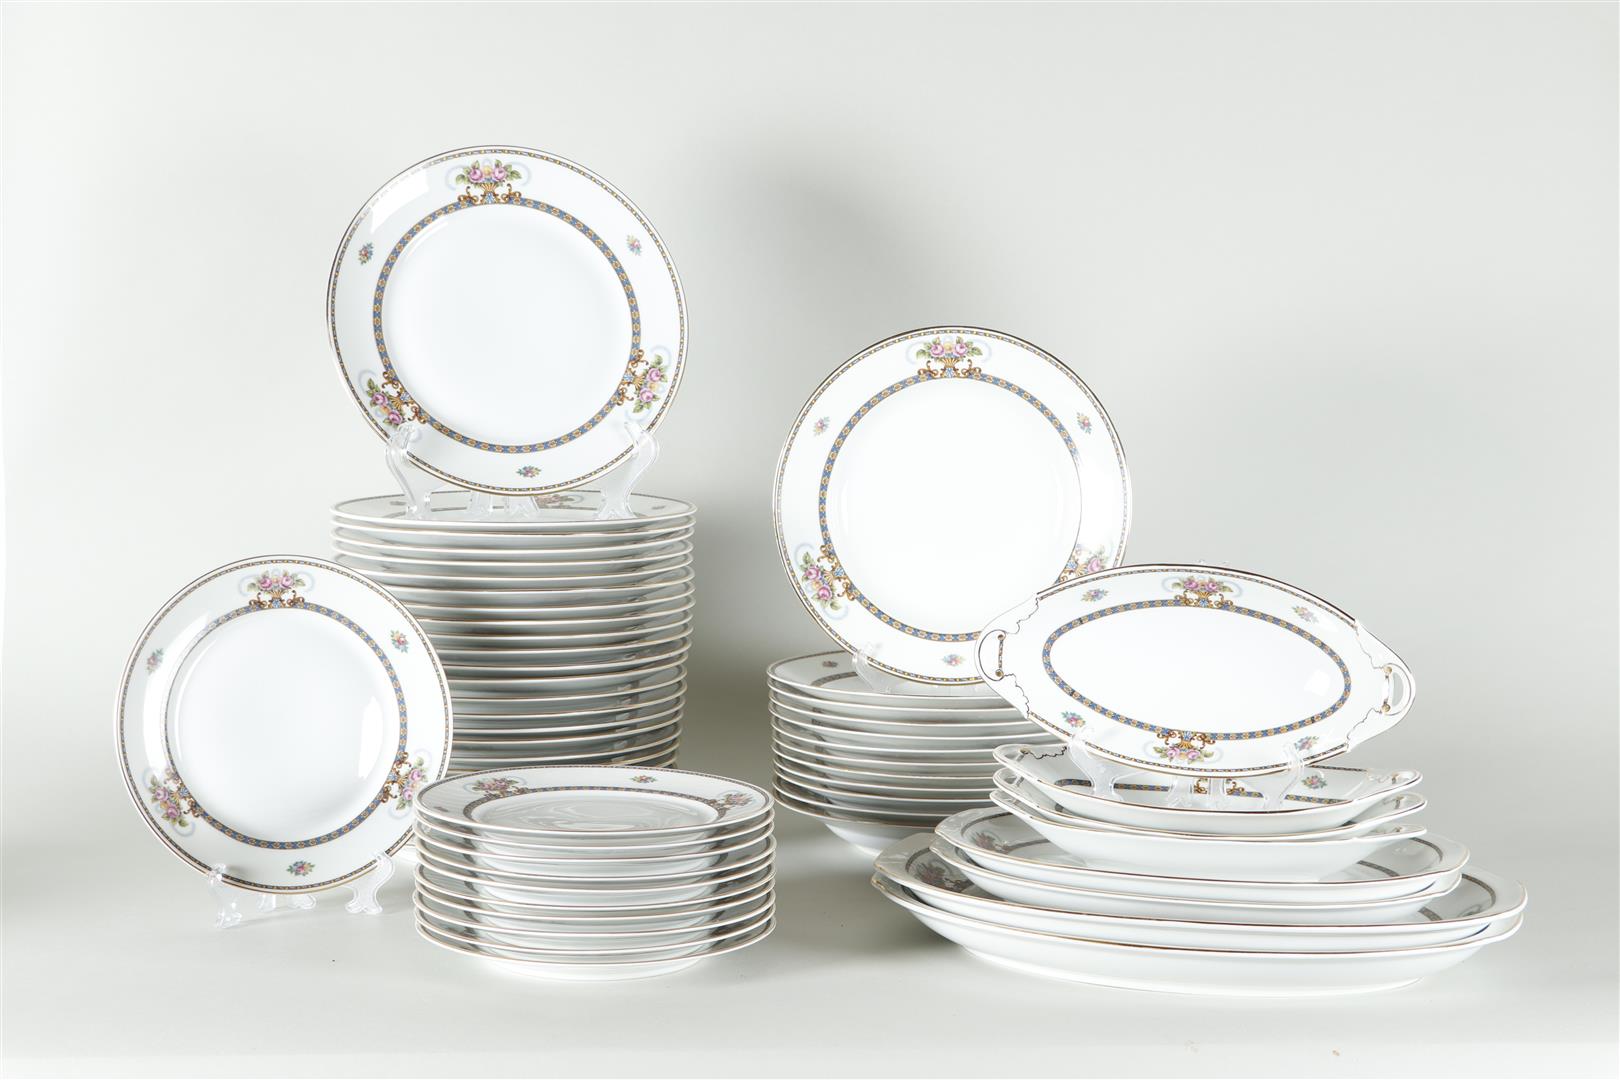 An extensive dinner set with floral decoration. 